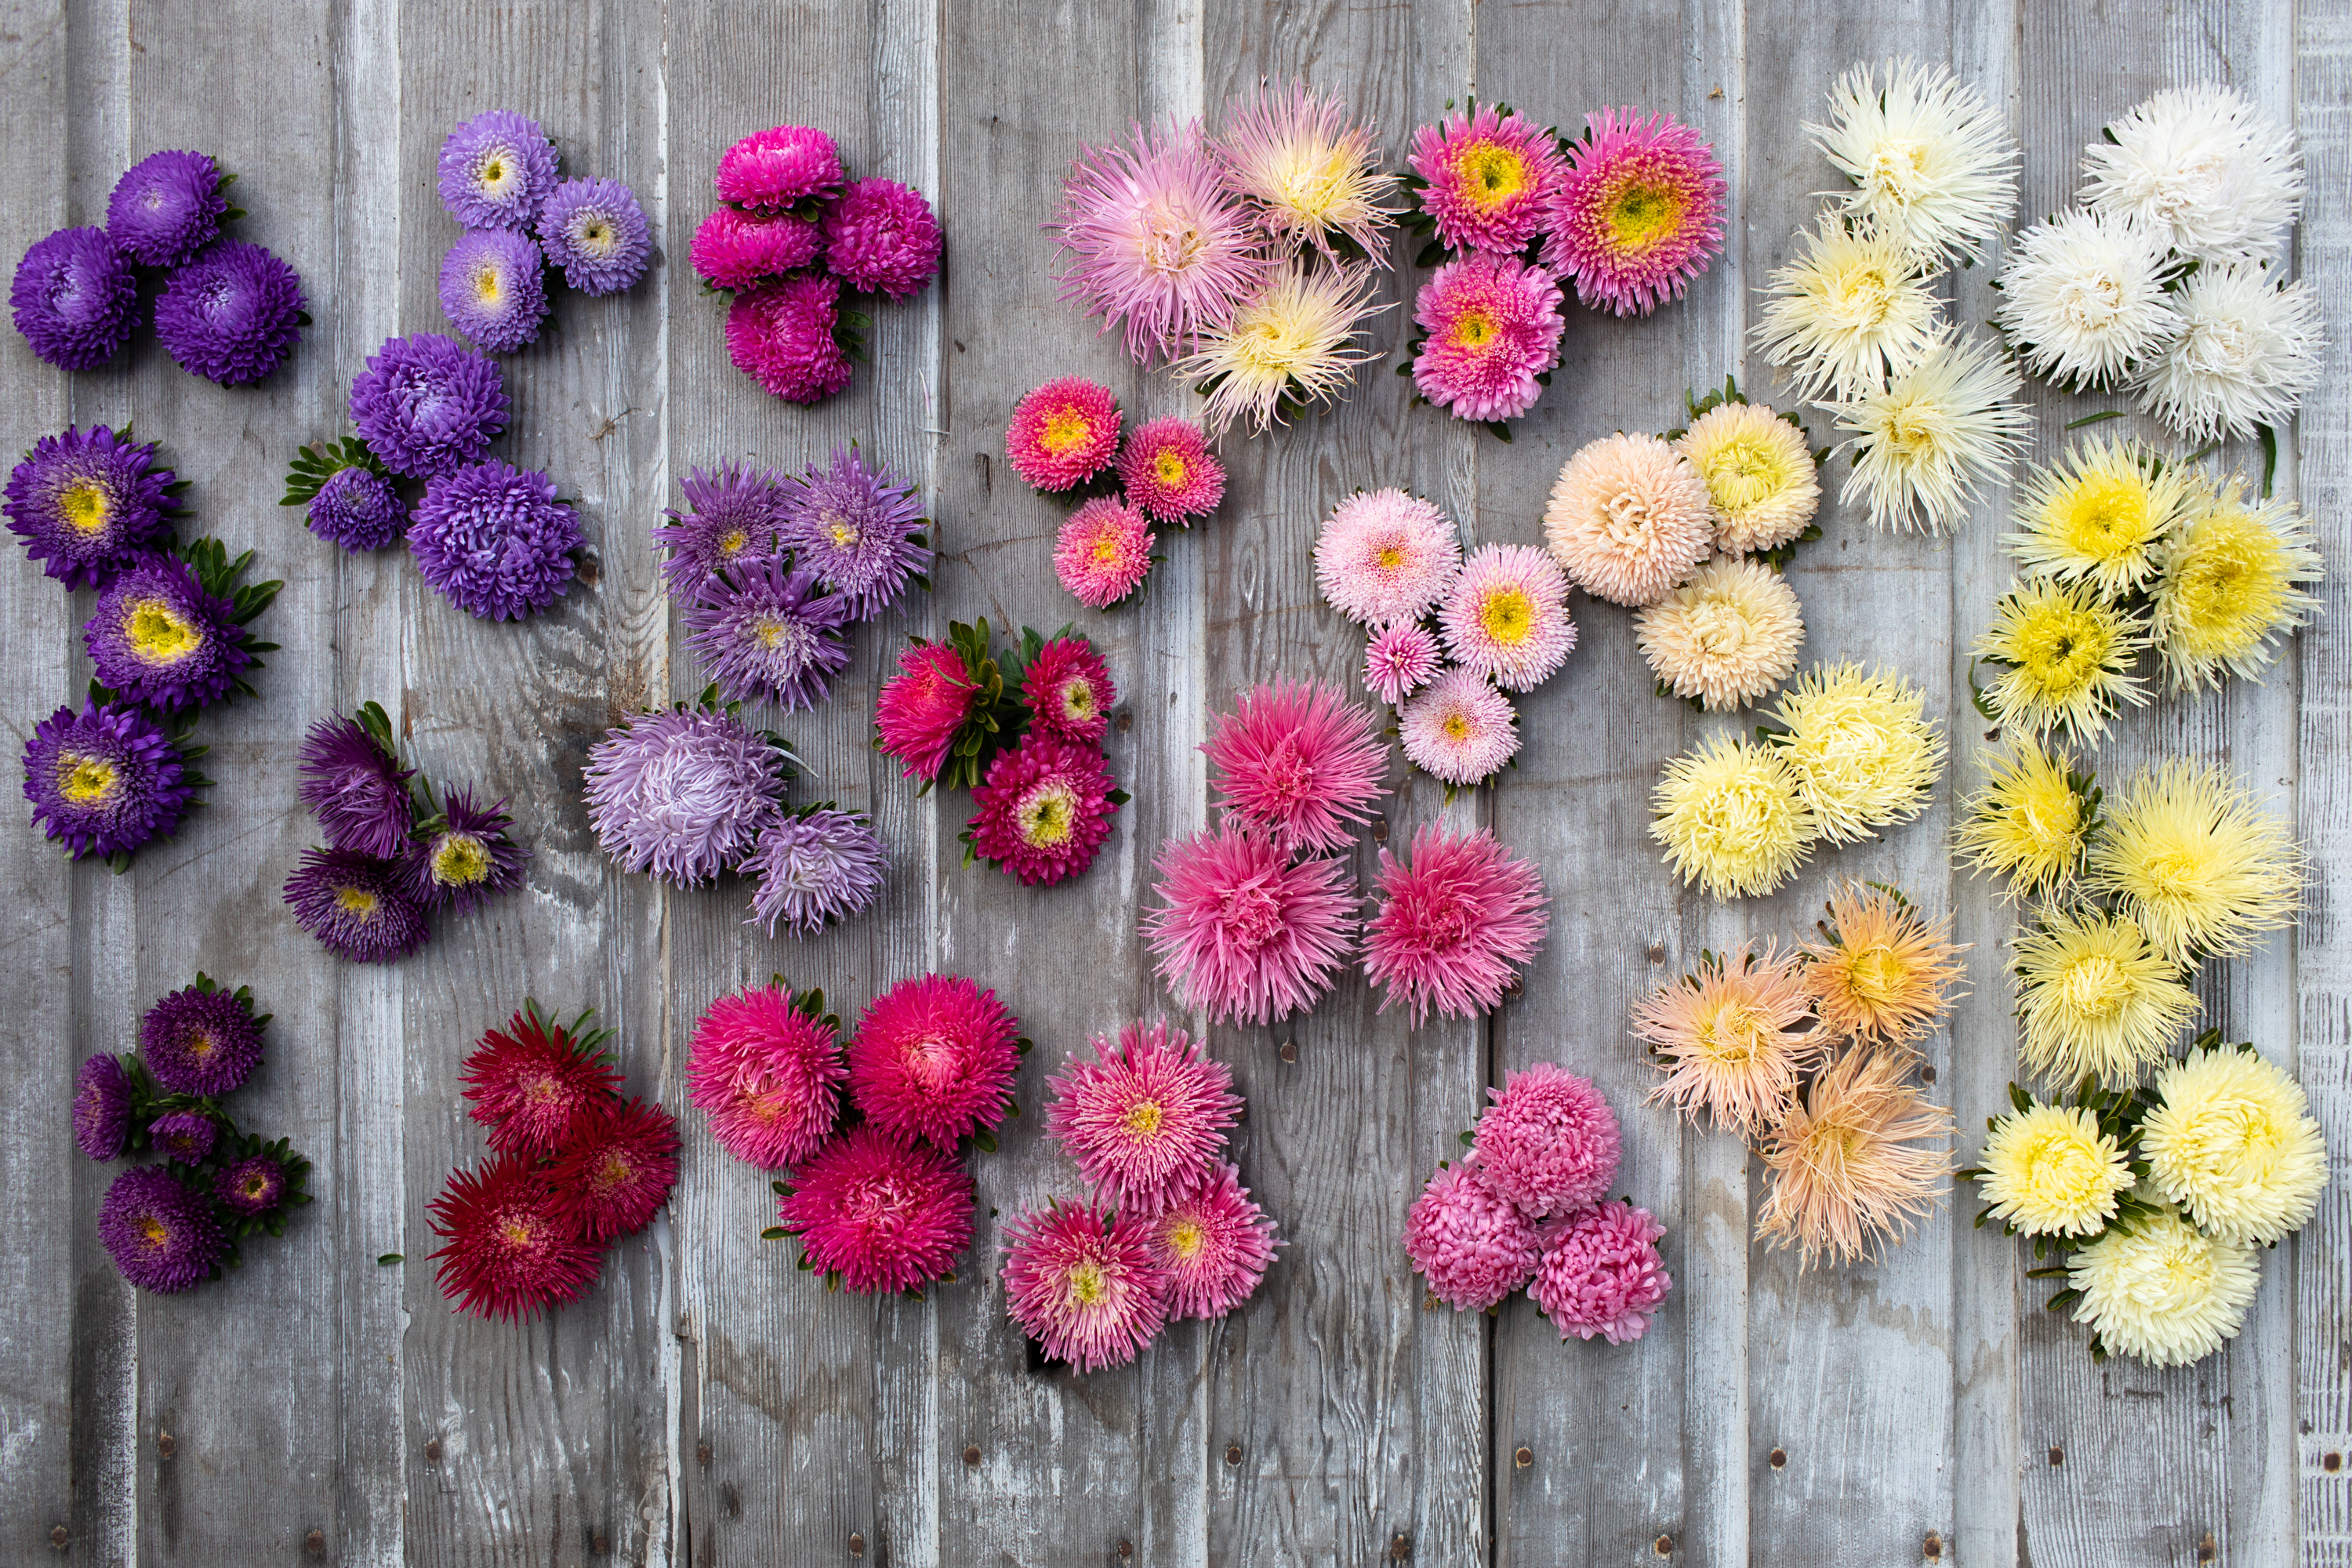 china aster flower heads arranged by color on a wood surface